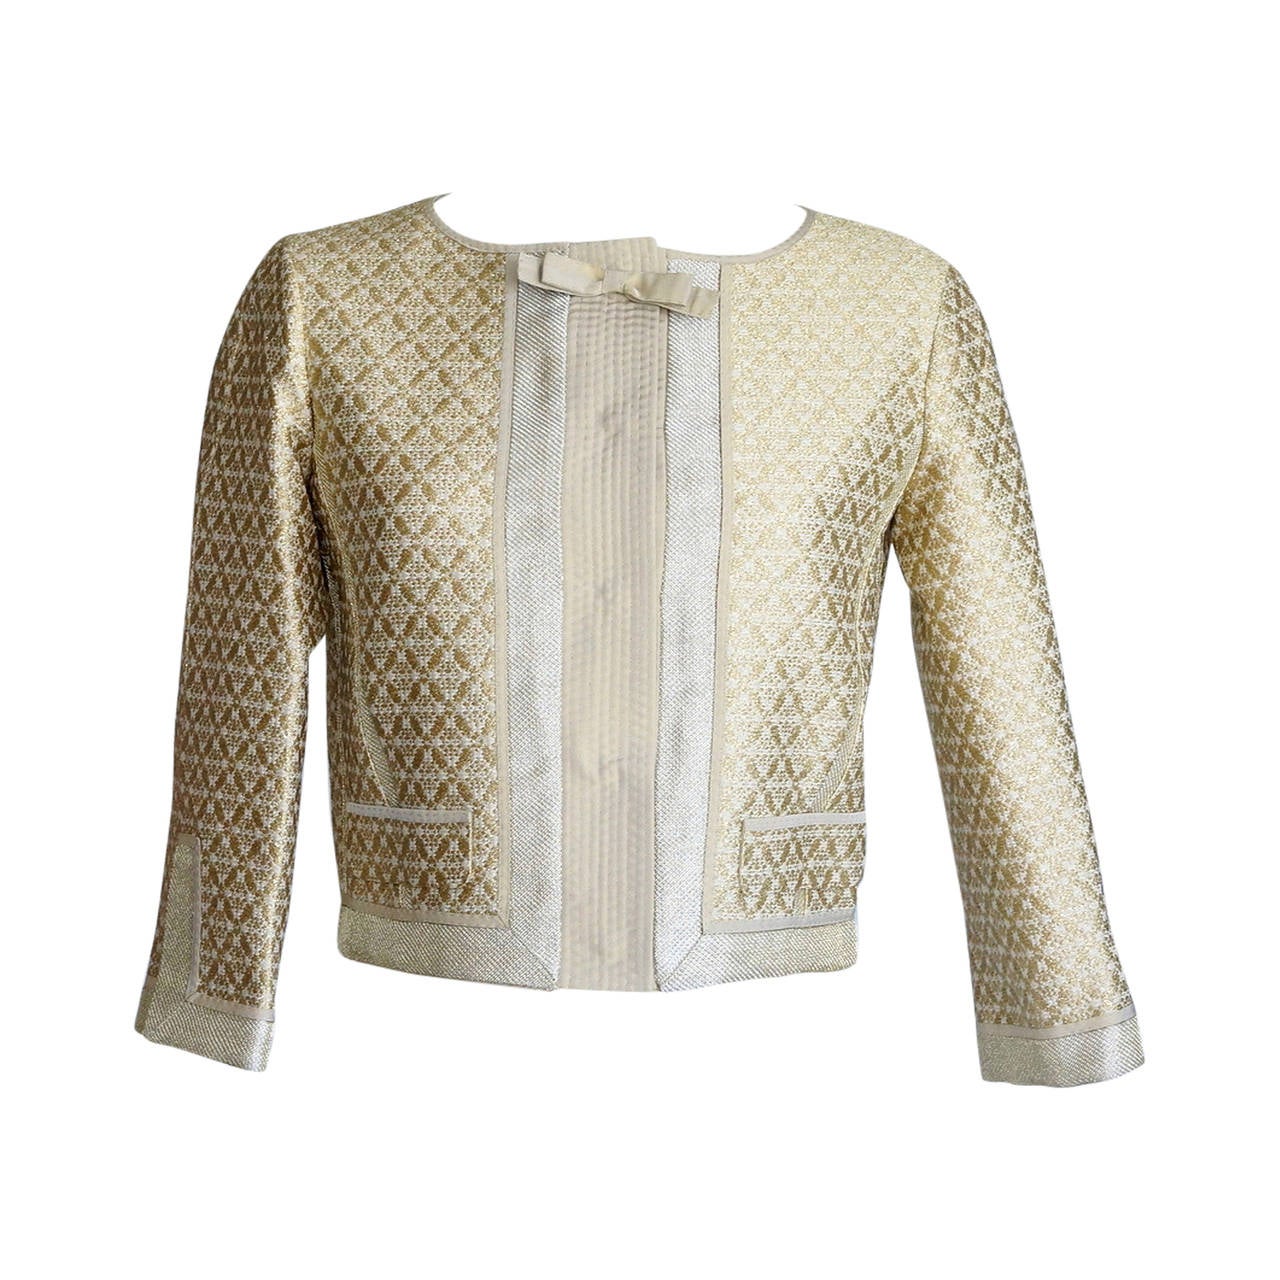 Louis Vuitton Jacket Gold Brocade Beautiful Fabric and Details 34 / 4  For Sale